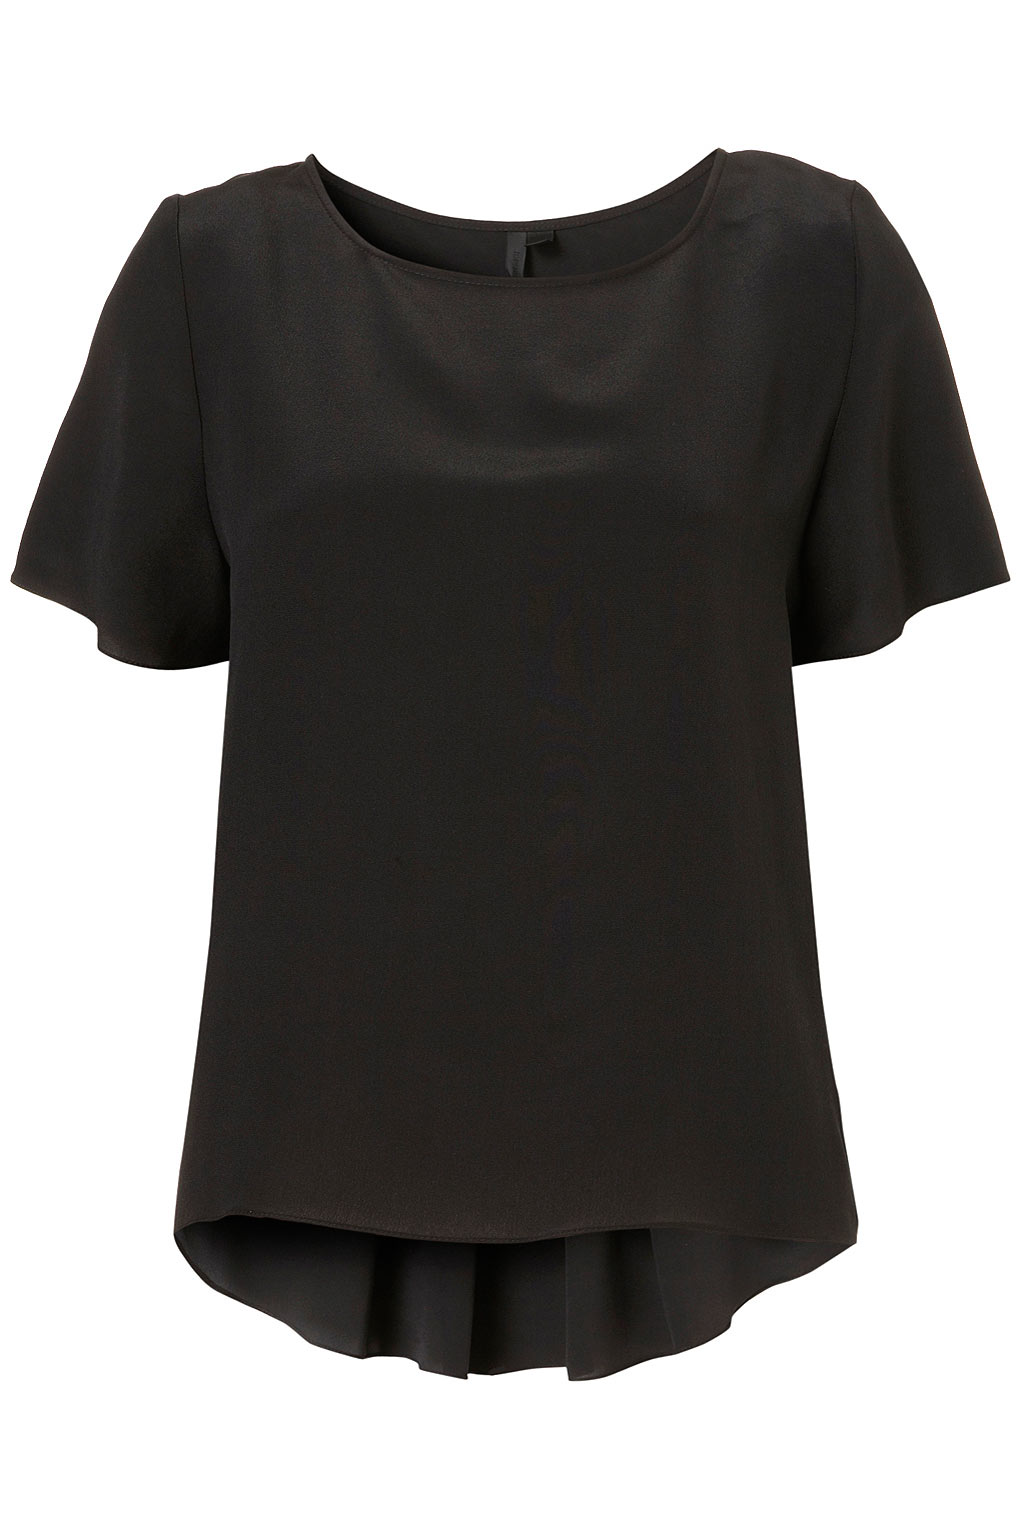 Topshop Pleat Back Top By Boutique in Black | Lyst